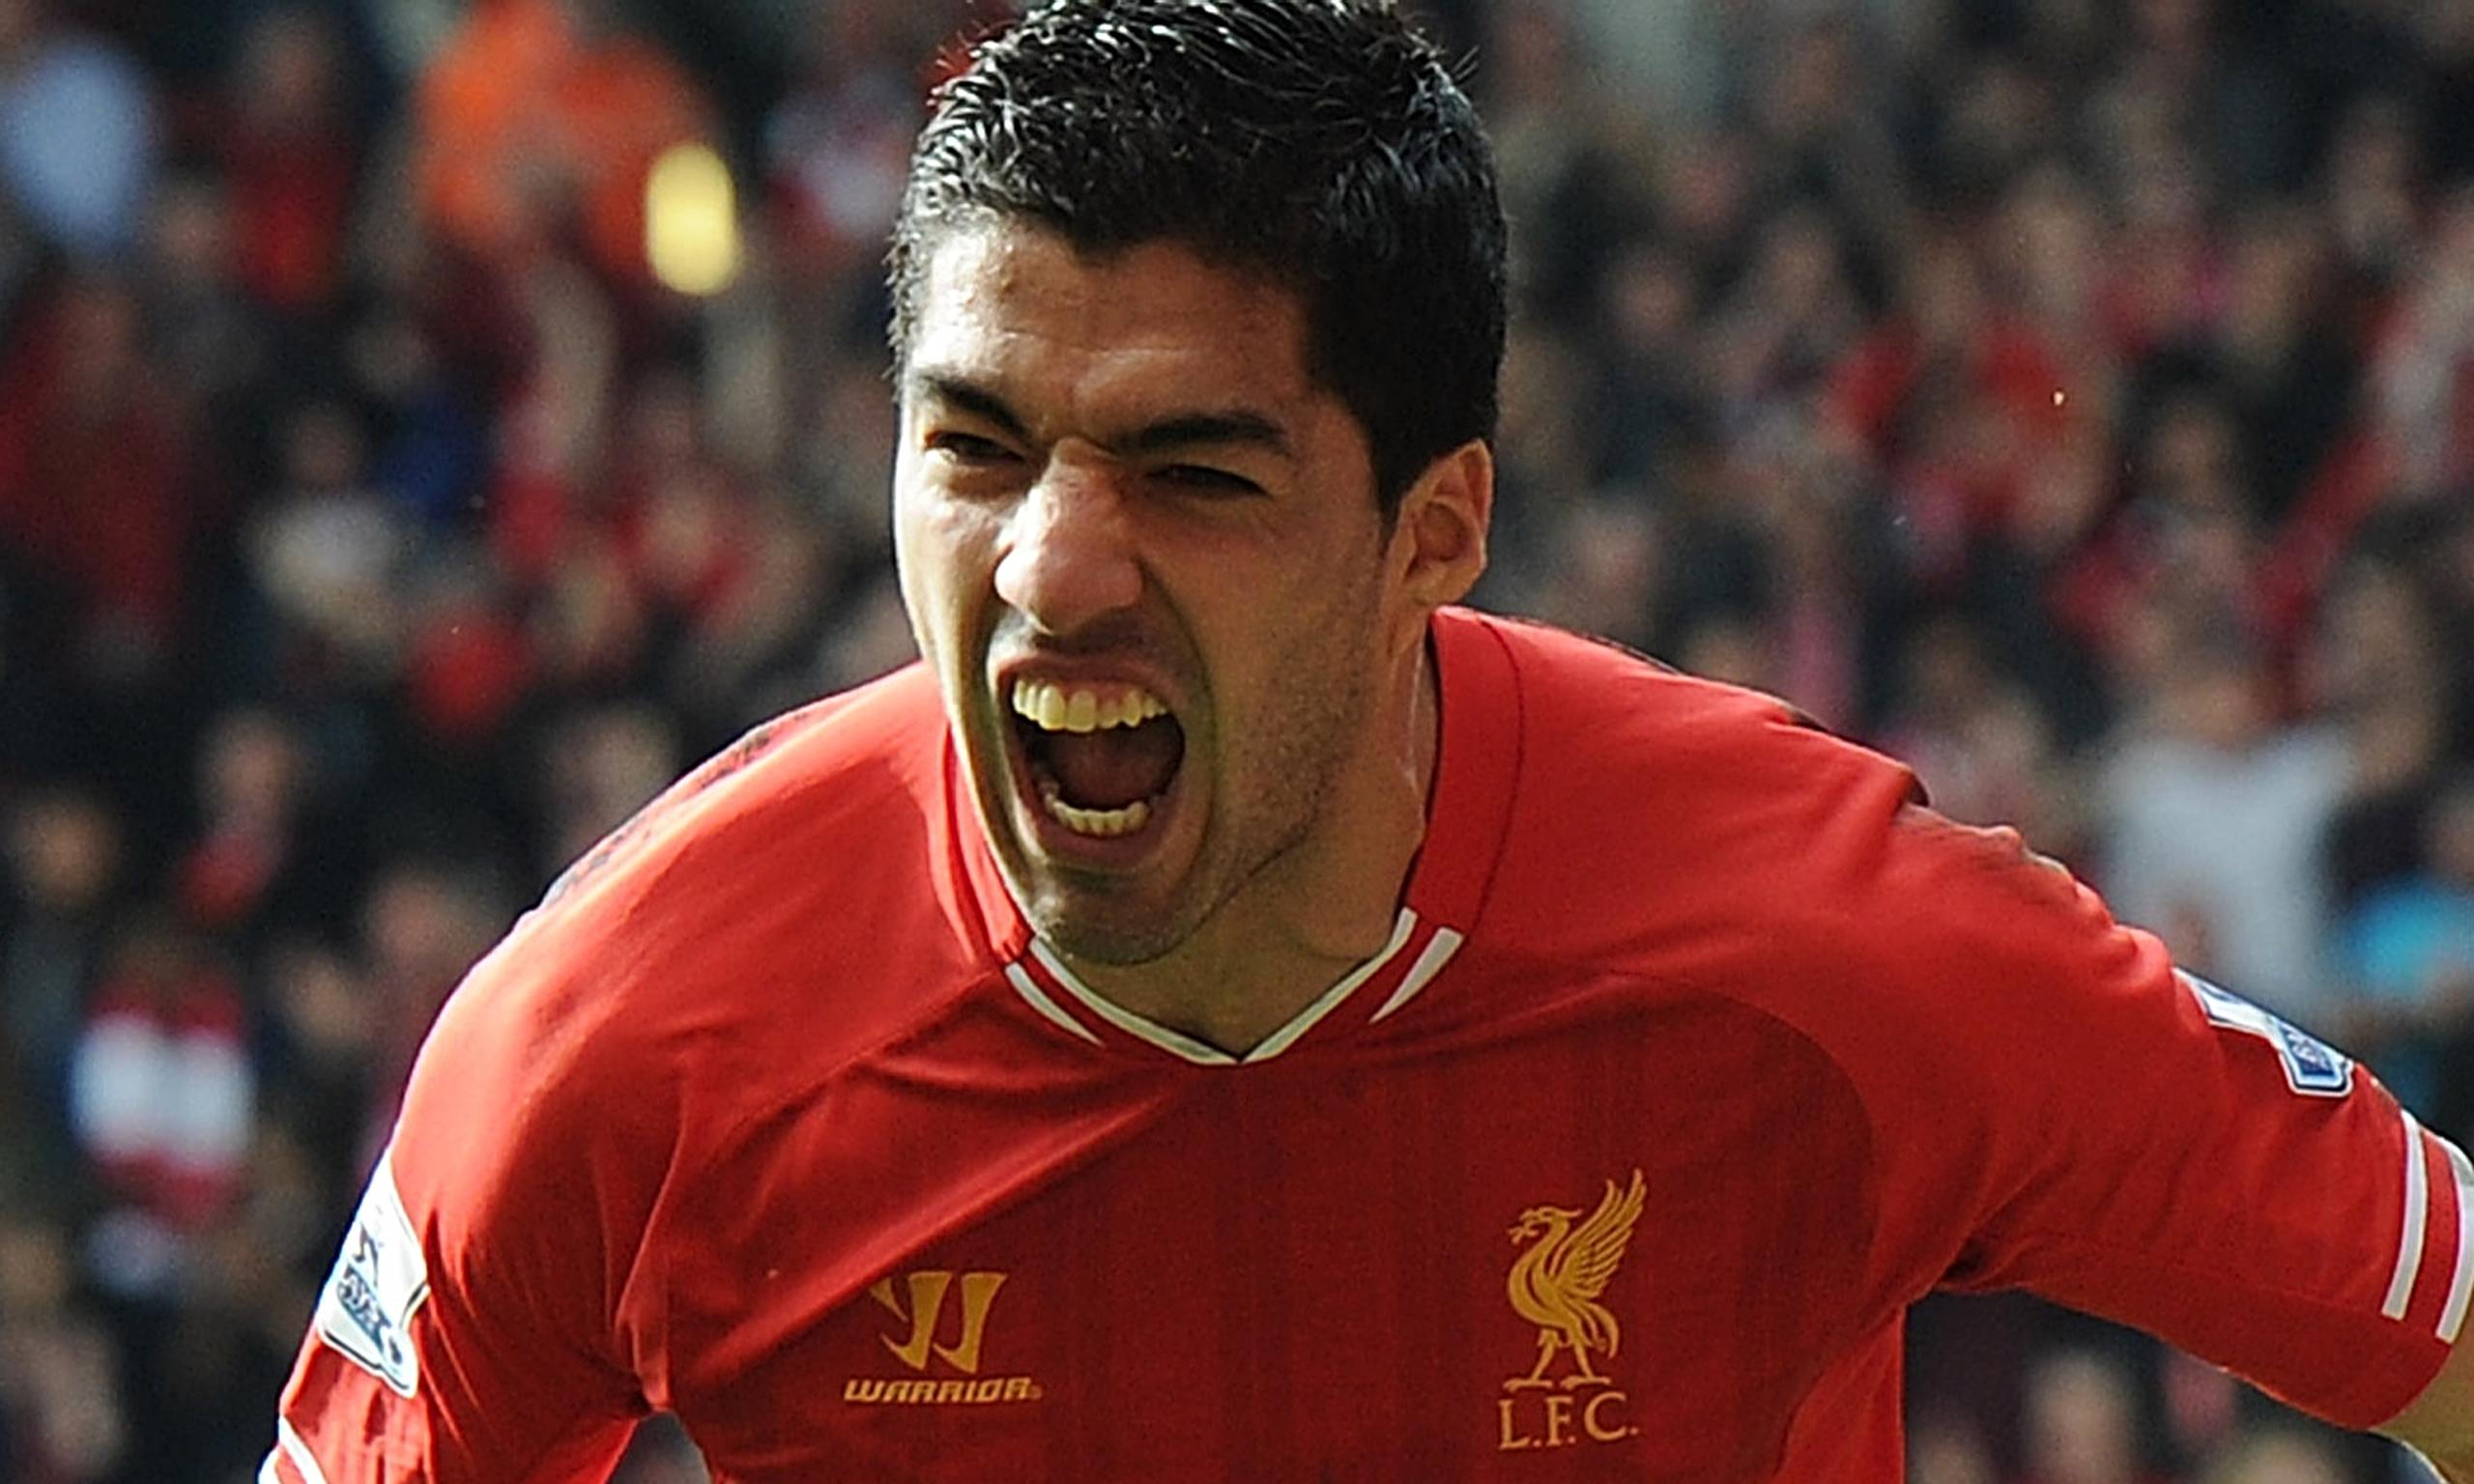 Luis Suarez getting professional help to stop biting opponents | Wadsam